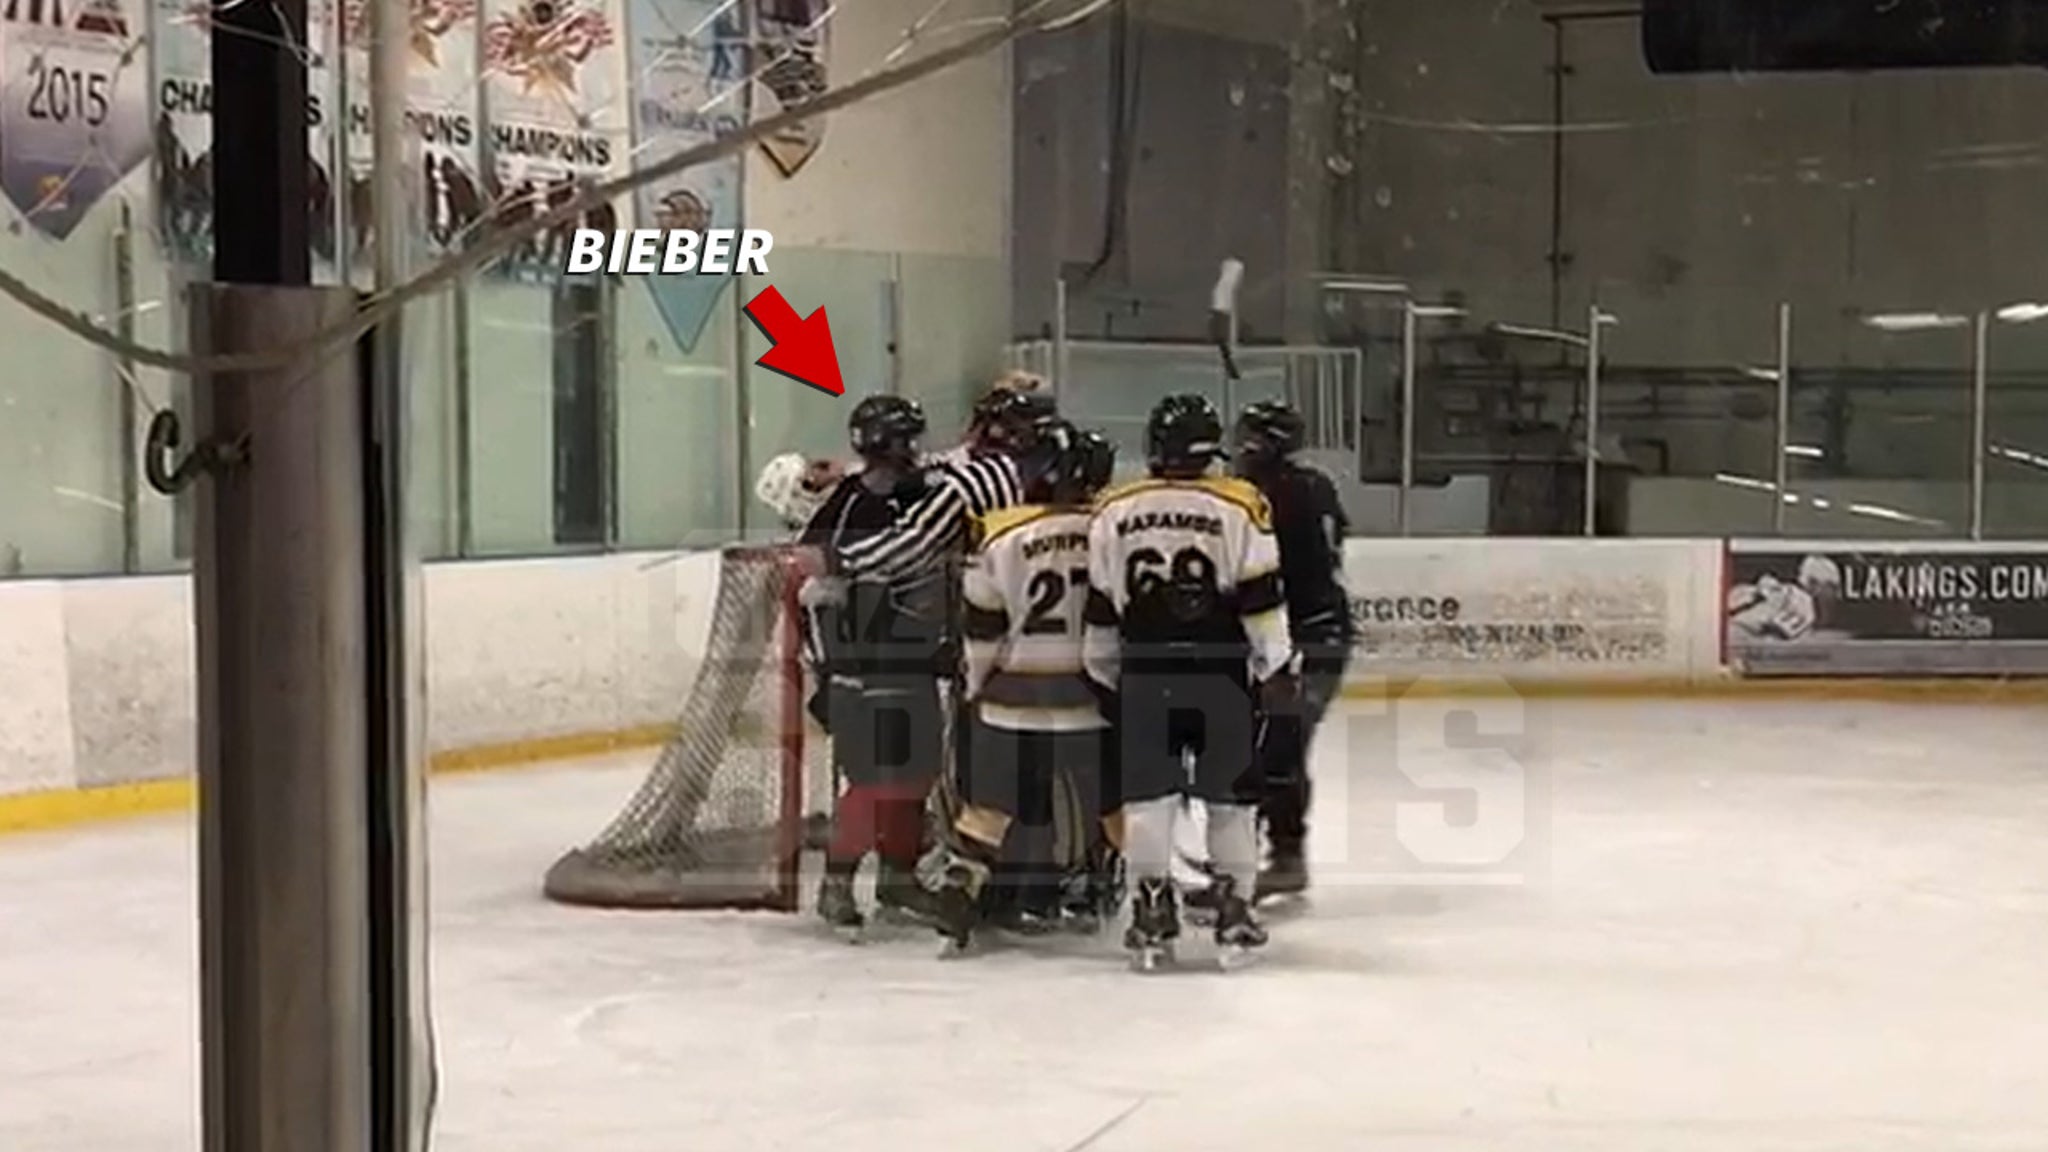 Justin Bieber Hits the Ice For Late Night Hockey Game, Justin Bieber